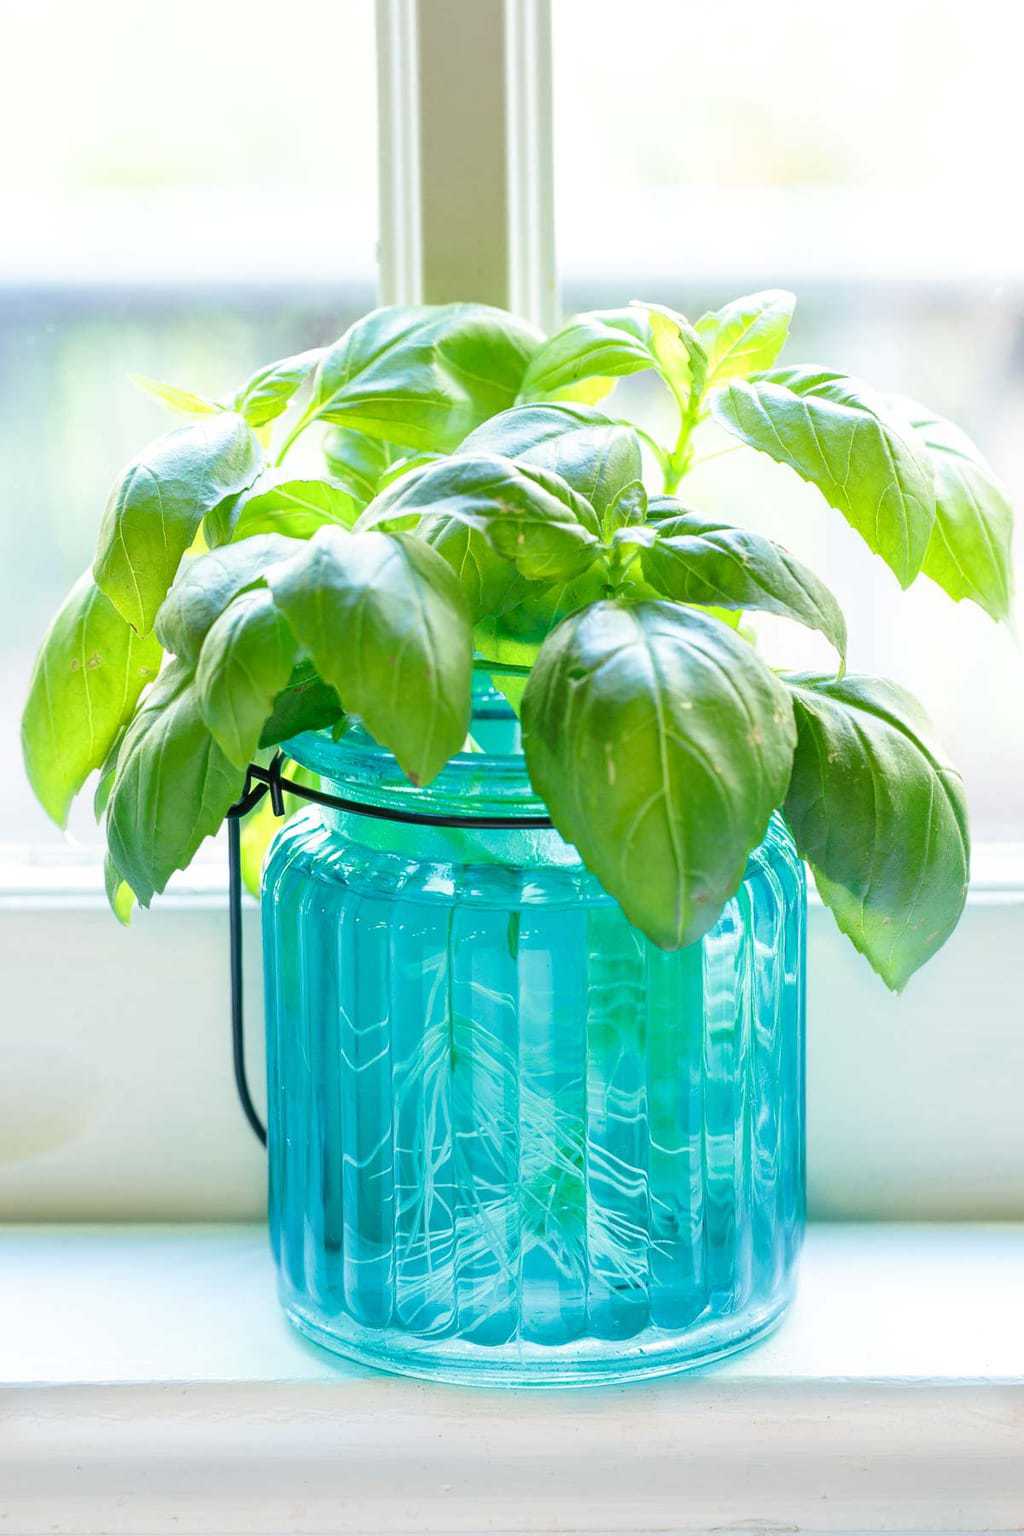 How to Root Basil from Cuttings